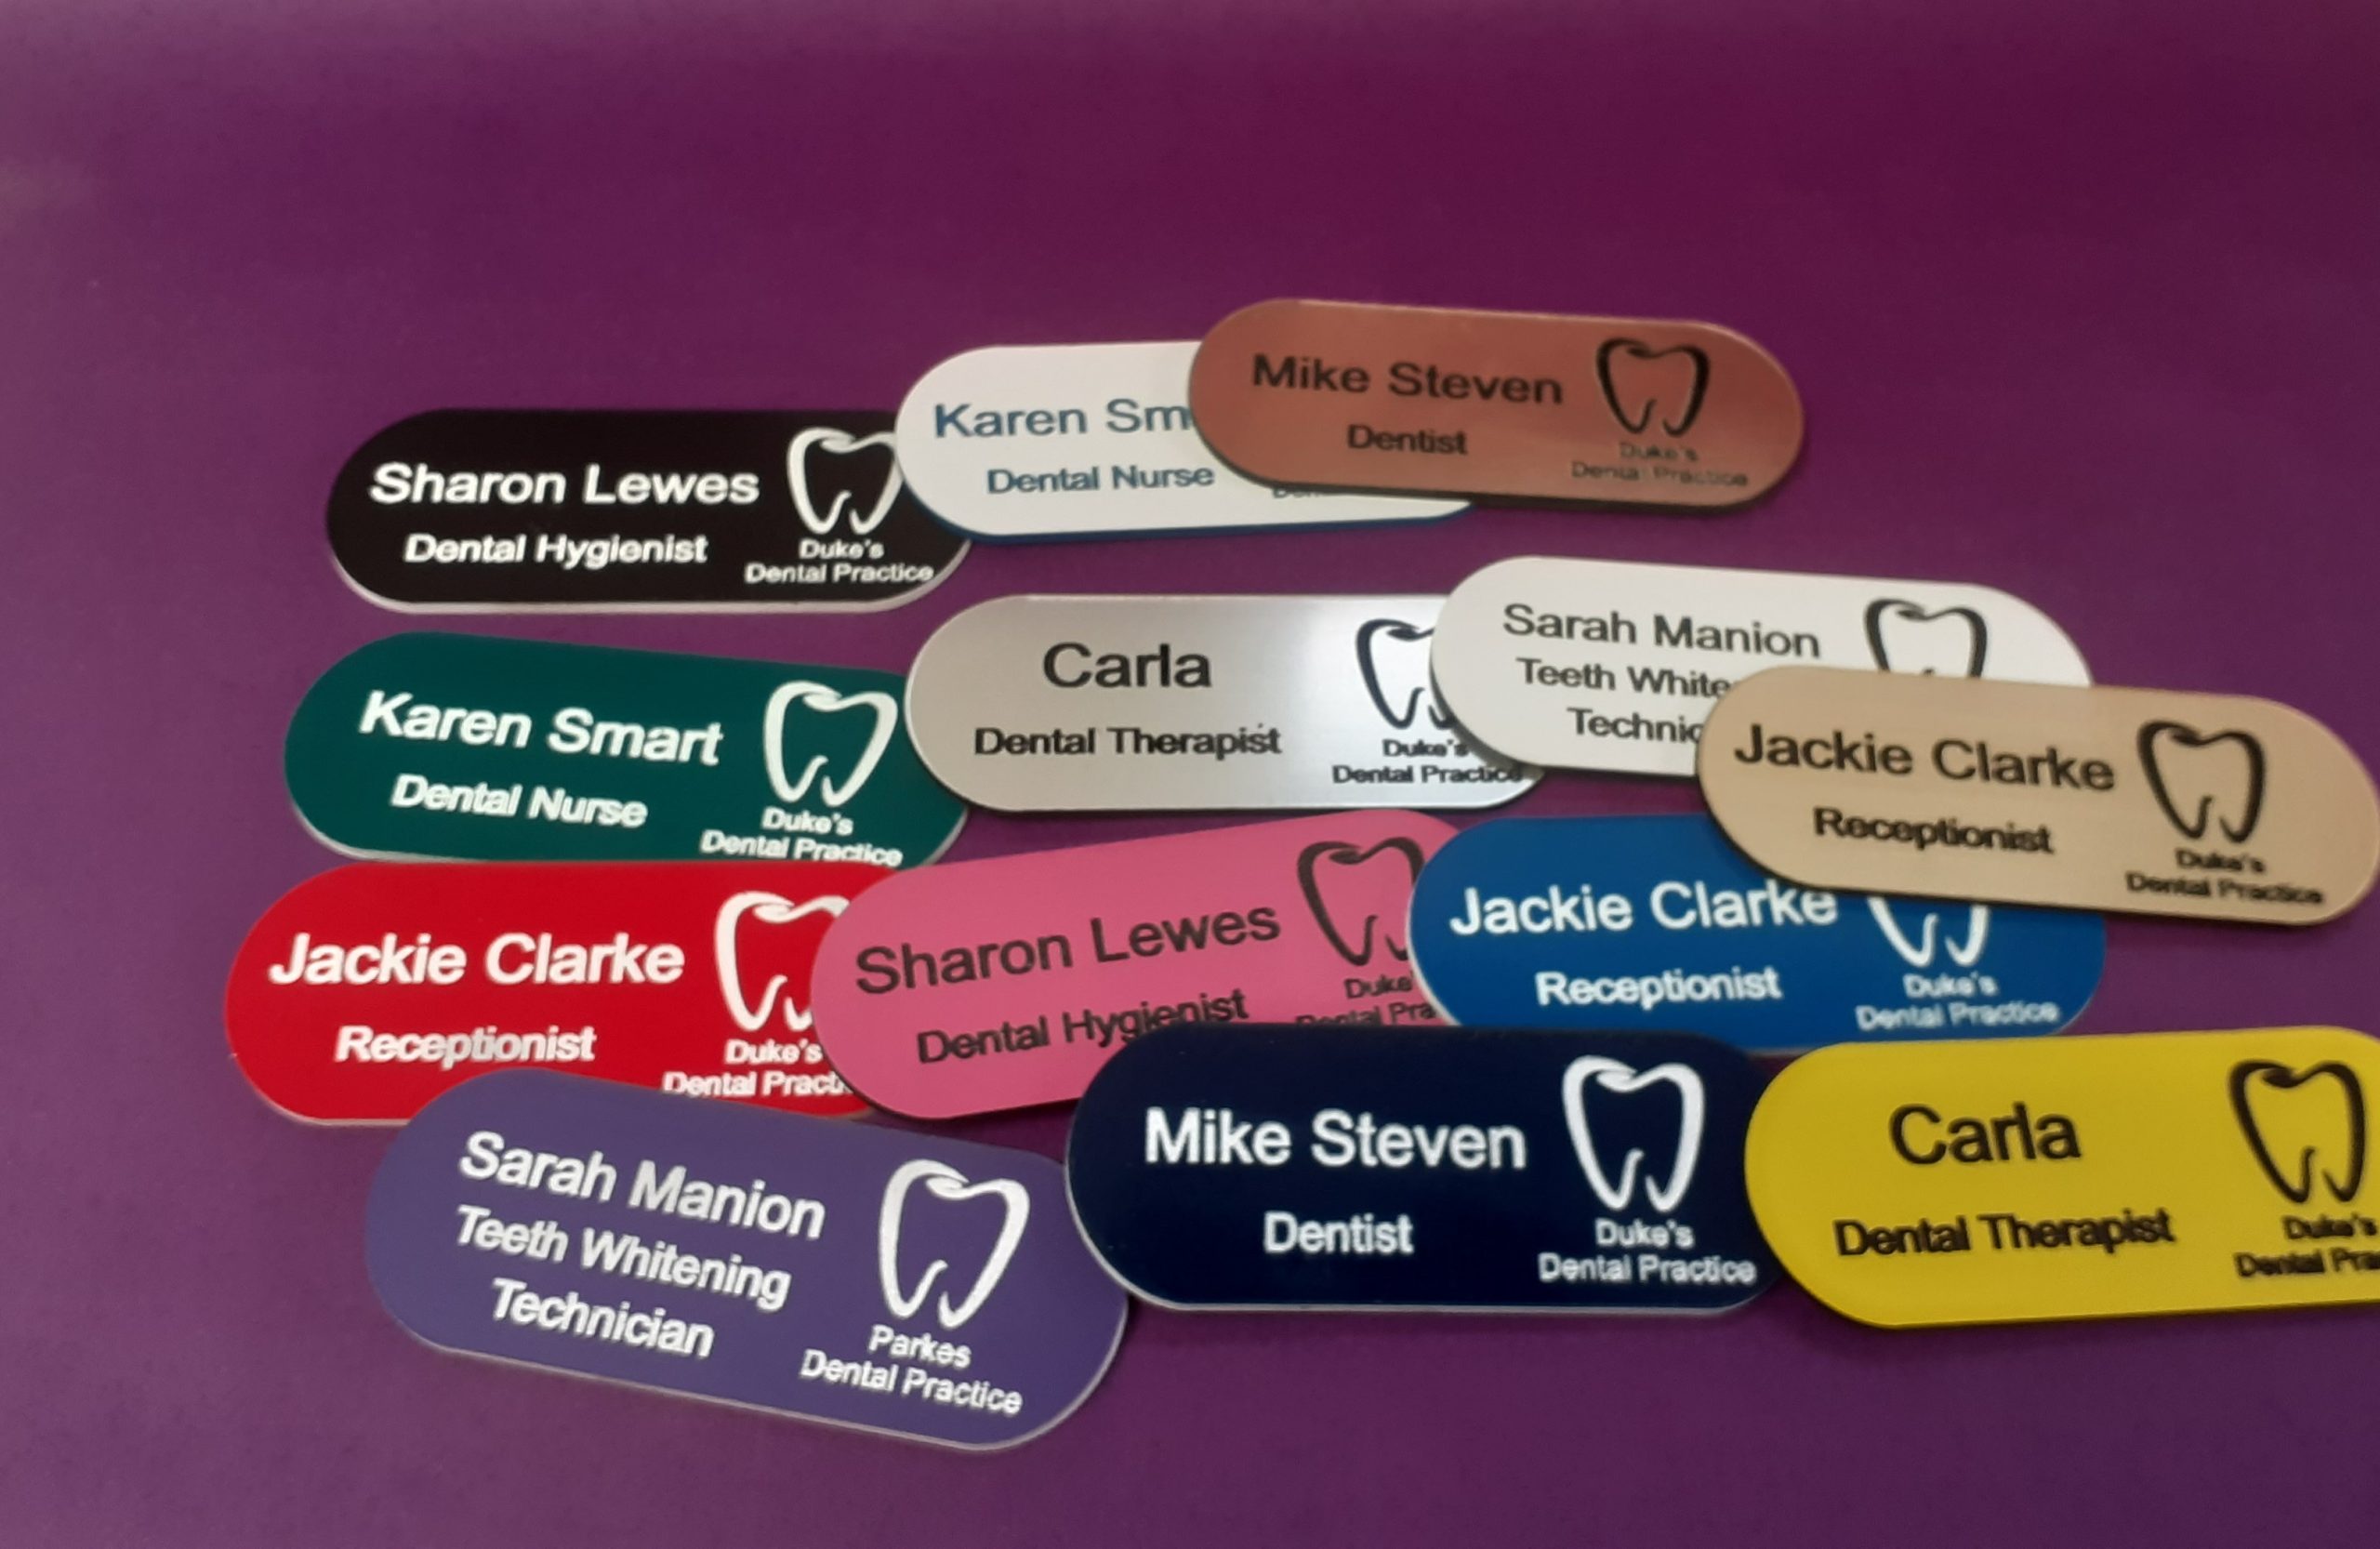 A collection of vibrant and diverse name badges, each uniquely coloured in shades such as blue, red, green, and yellow. The badges are designed in the shape of a pill, featuring a distinctive tooth logo on the left-hand side